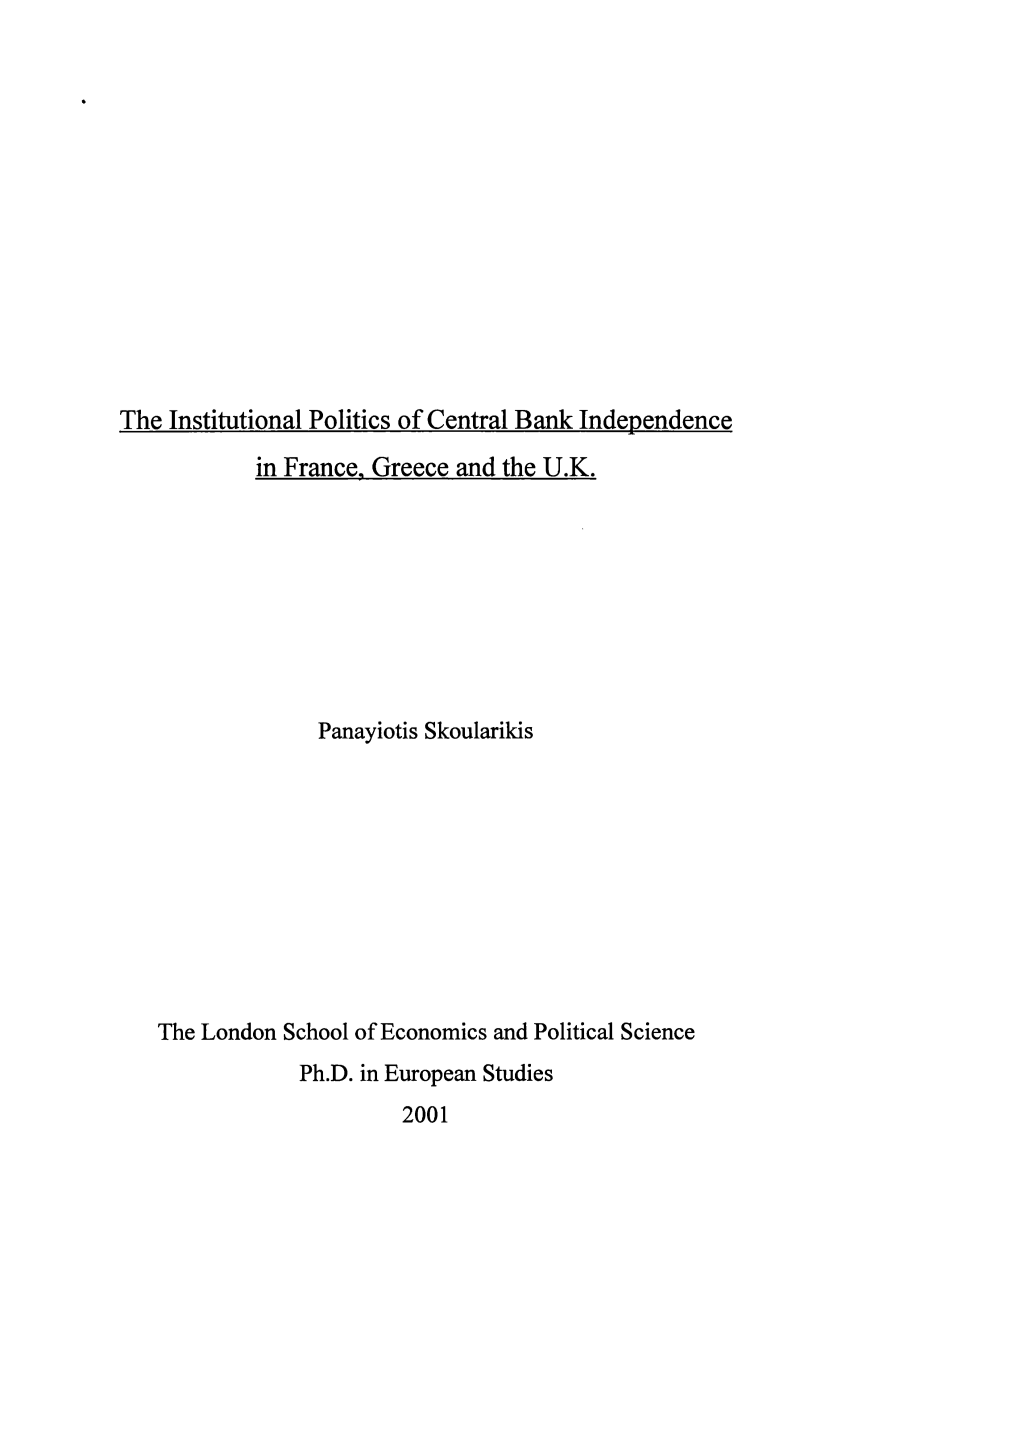 The Institutional Politics of Central Bank Independence in France